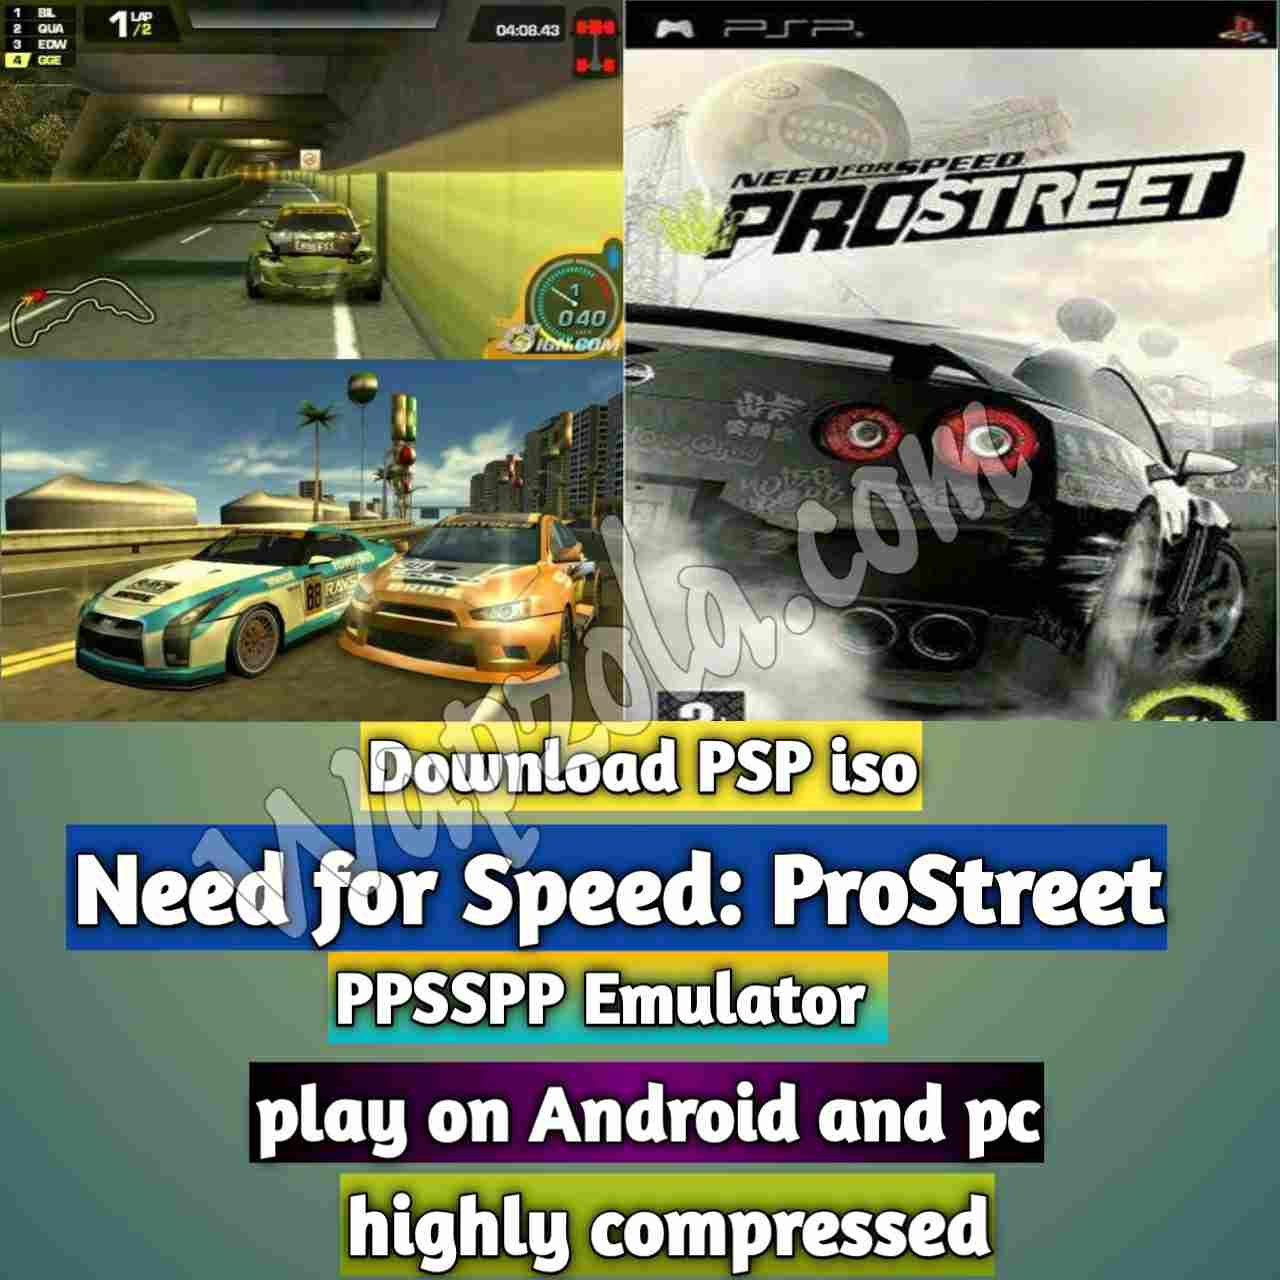 You are currently viewing [Download] Need for Speed: ProStreet iso ppsspp emulator – PSP APK Iso ROM highly compressed 130MB